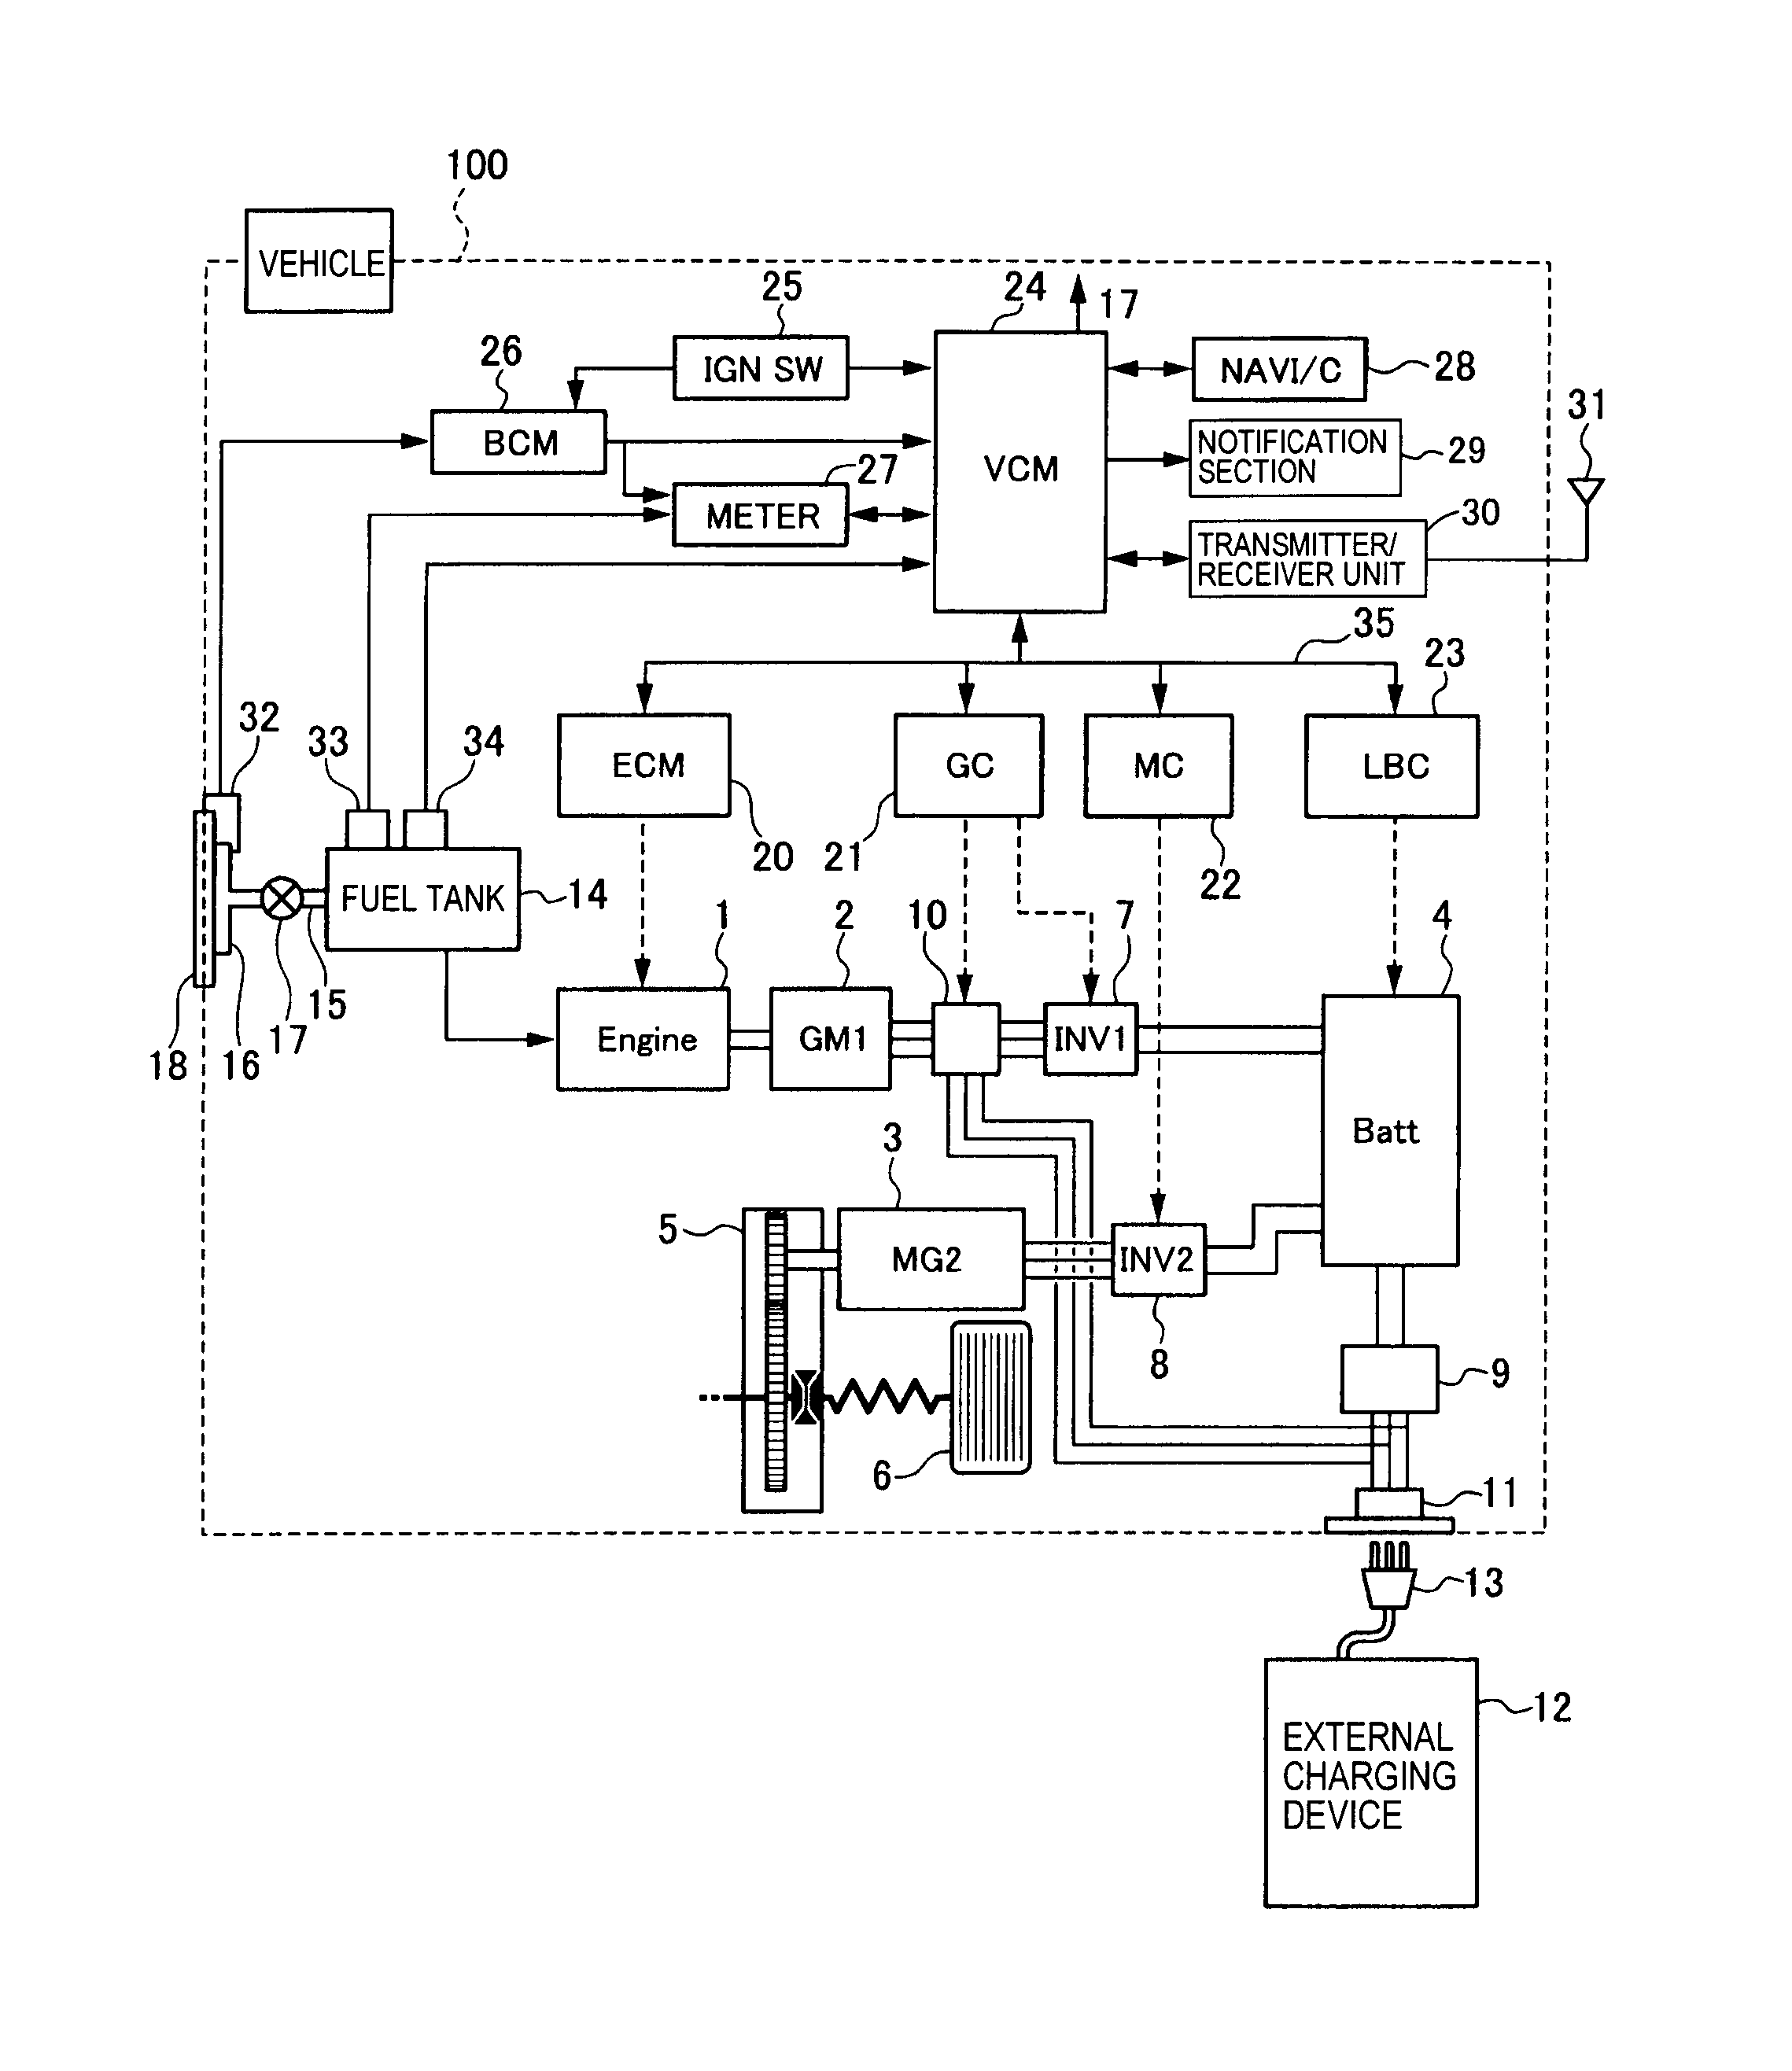 carrier ductable ac wiring diagram